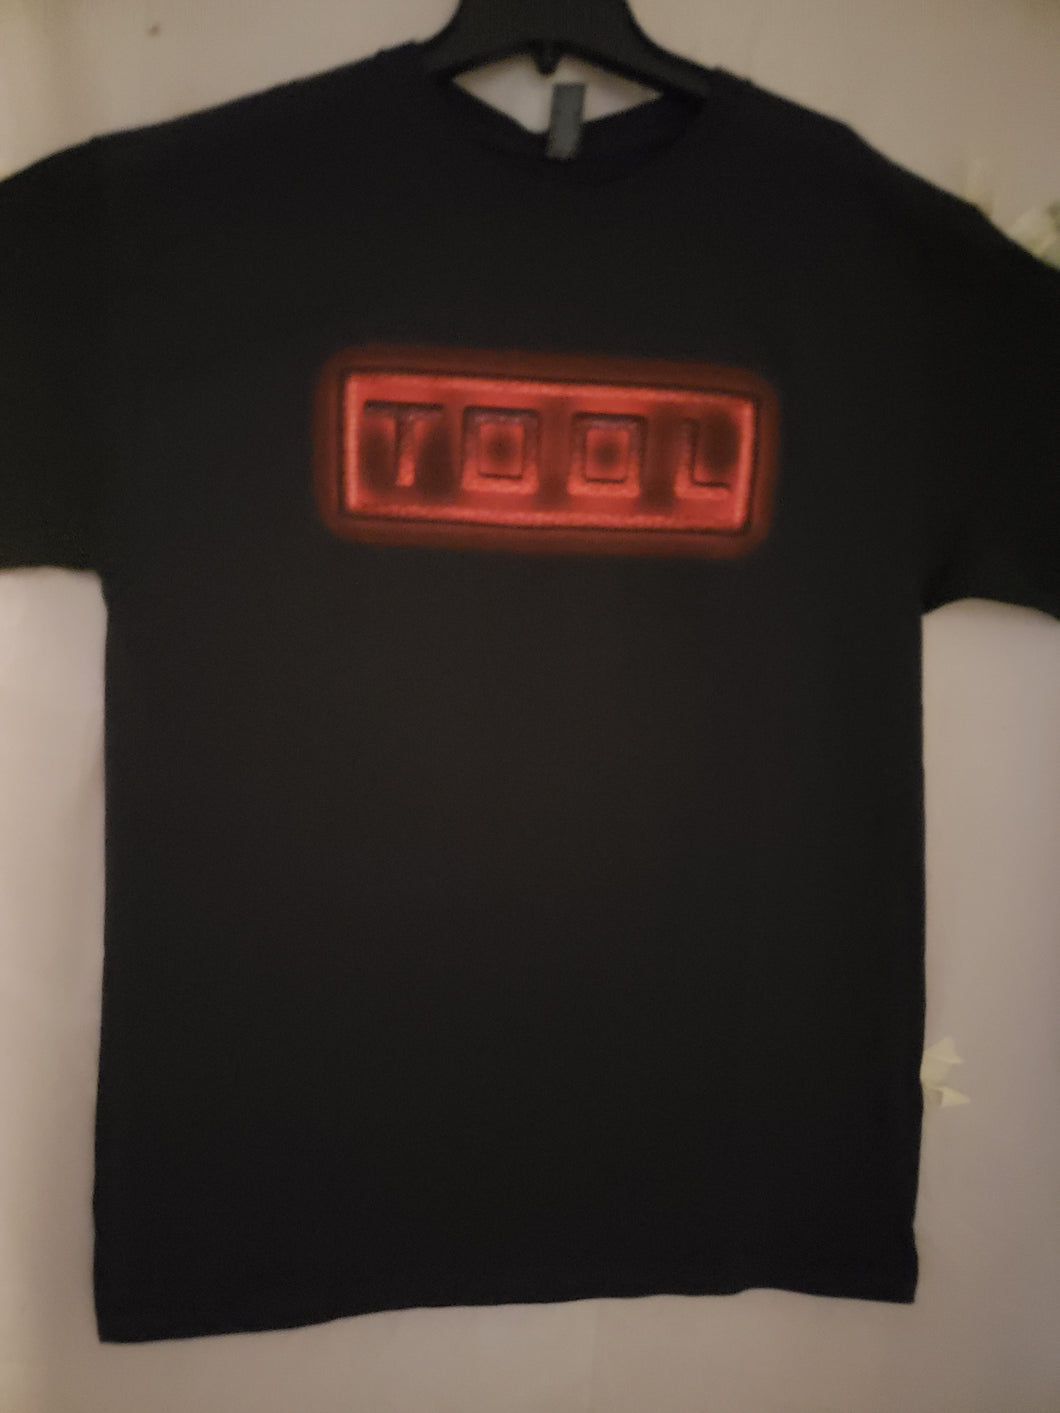 TOOL T-SHIRT BRAND NEW LARGE